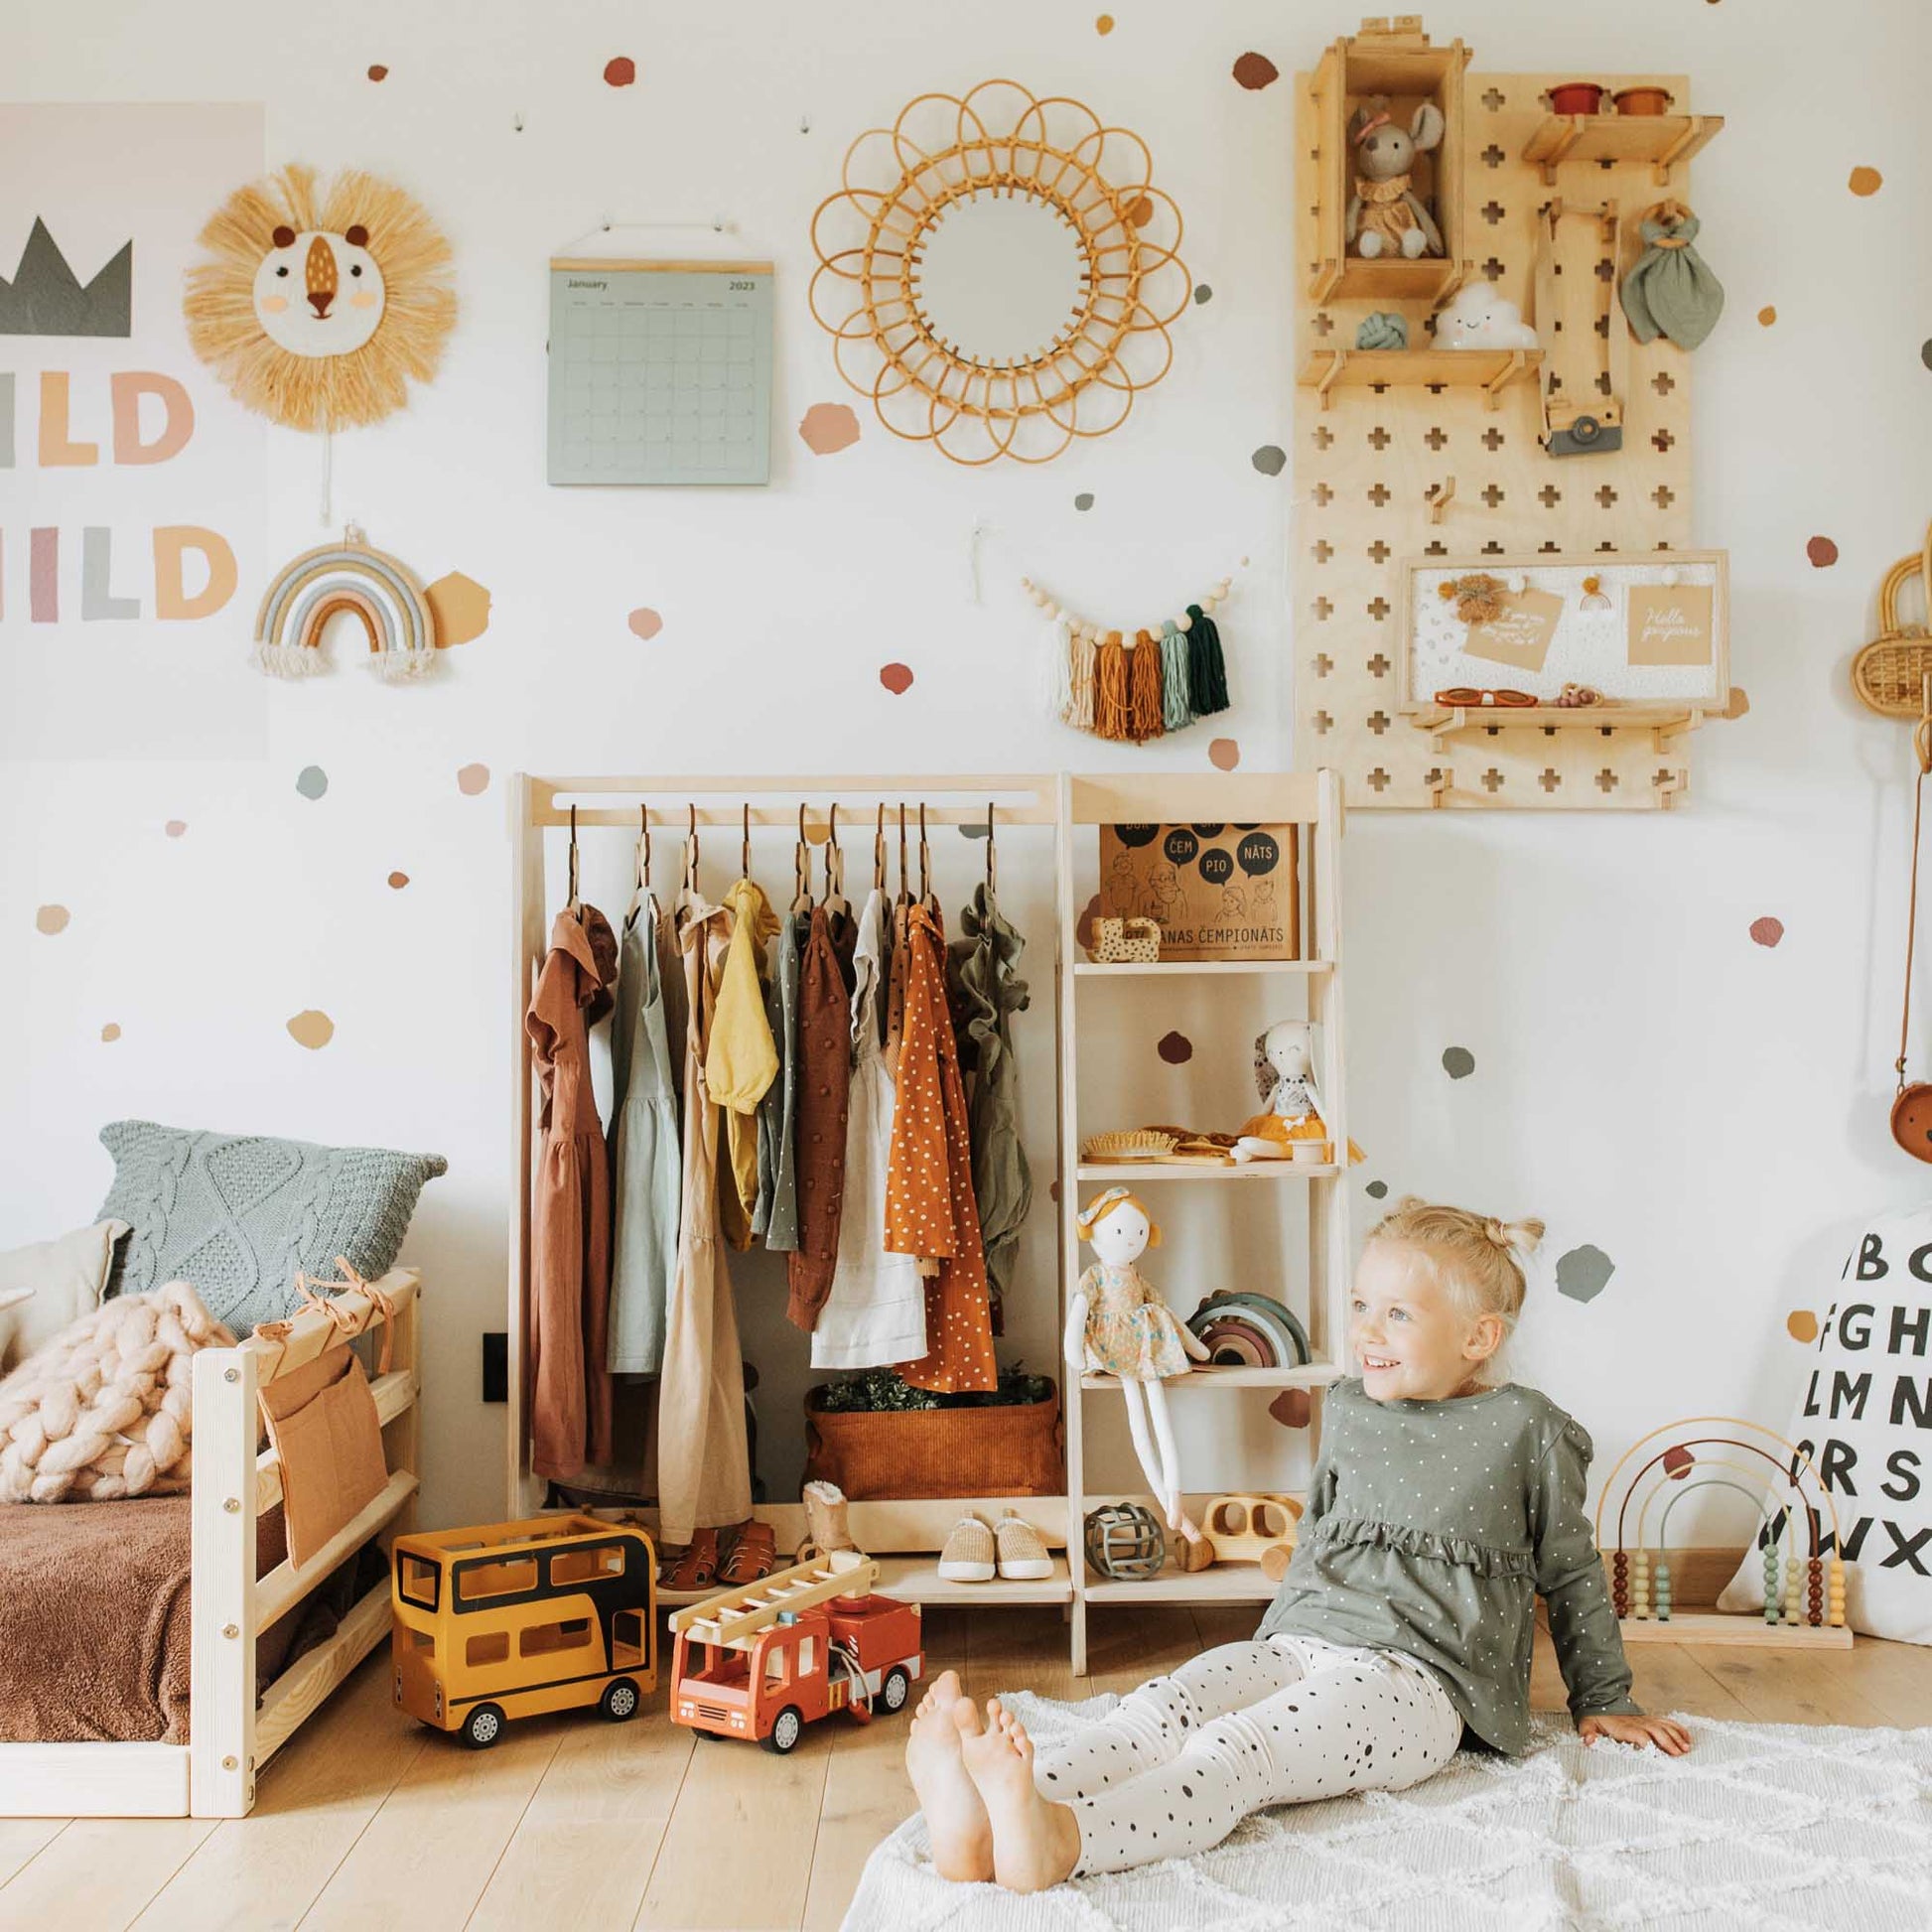 A child's room filled with toys, stuffed animals, and a Sweet Home From Wood Montessori wardrobe.